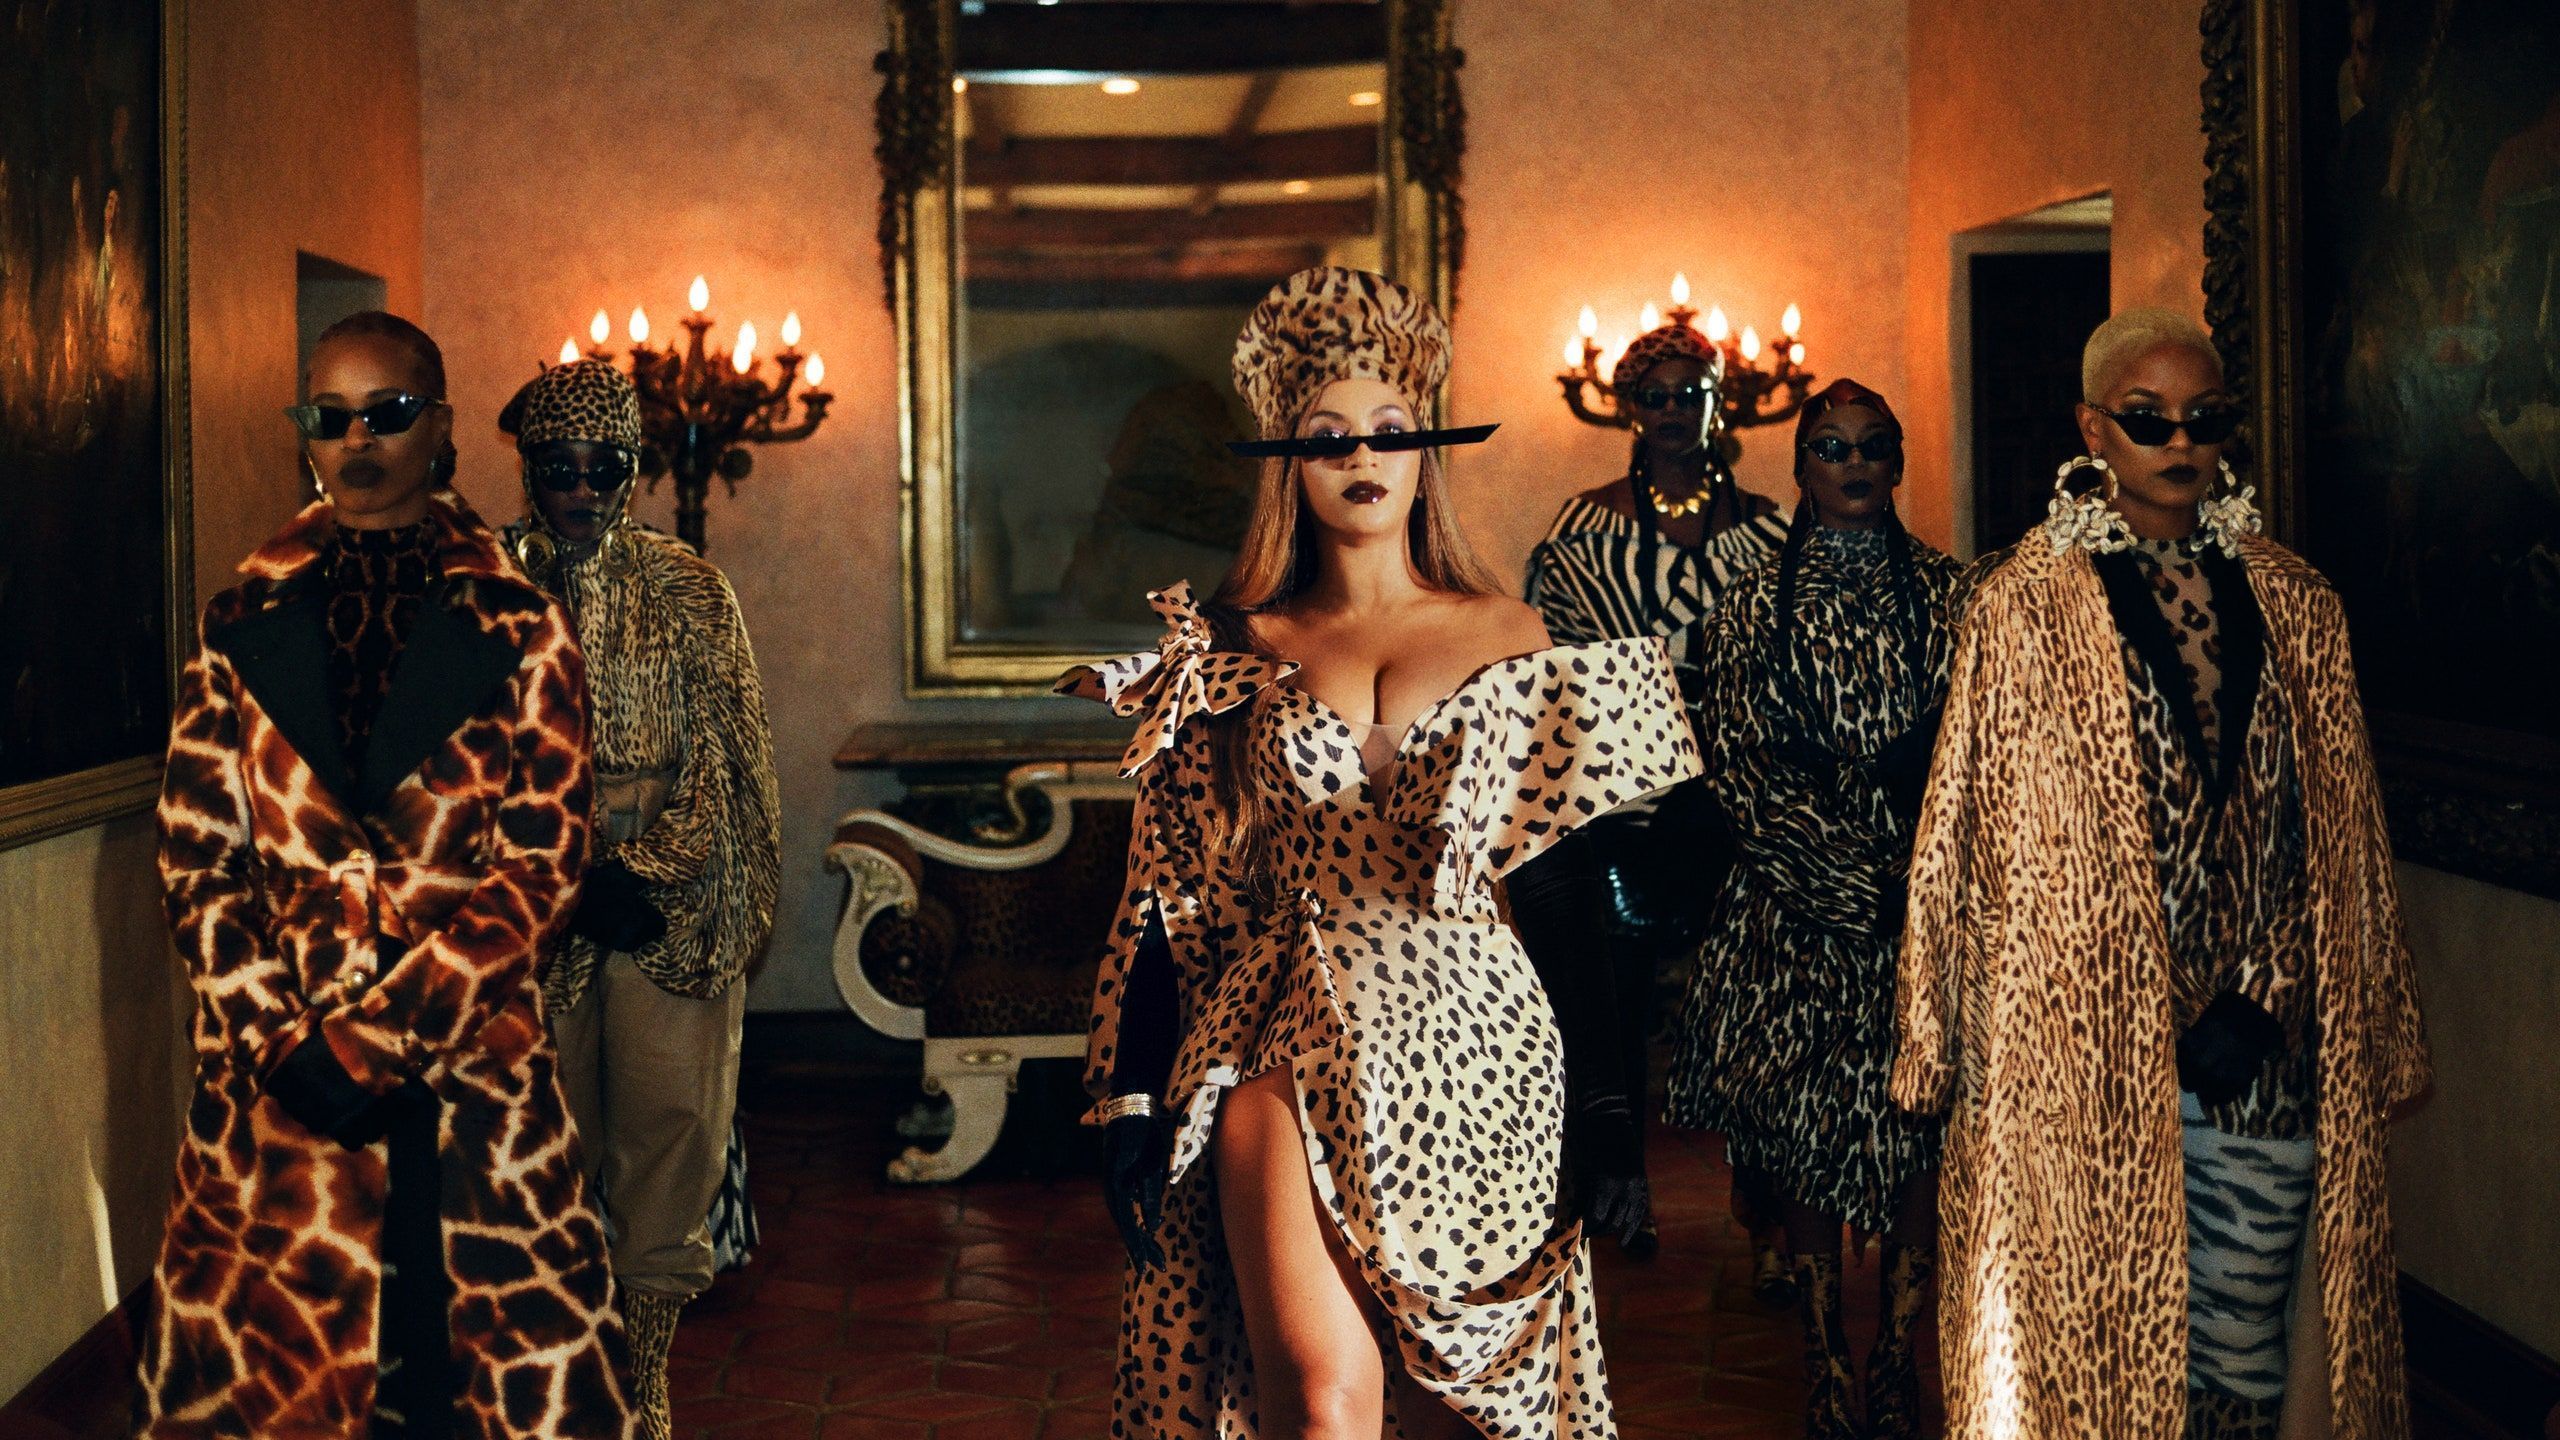 A group of people in leopard print clothing - Beyonce